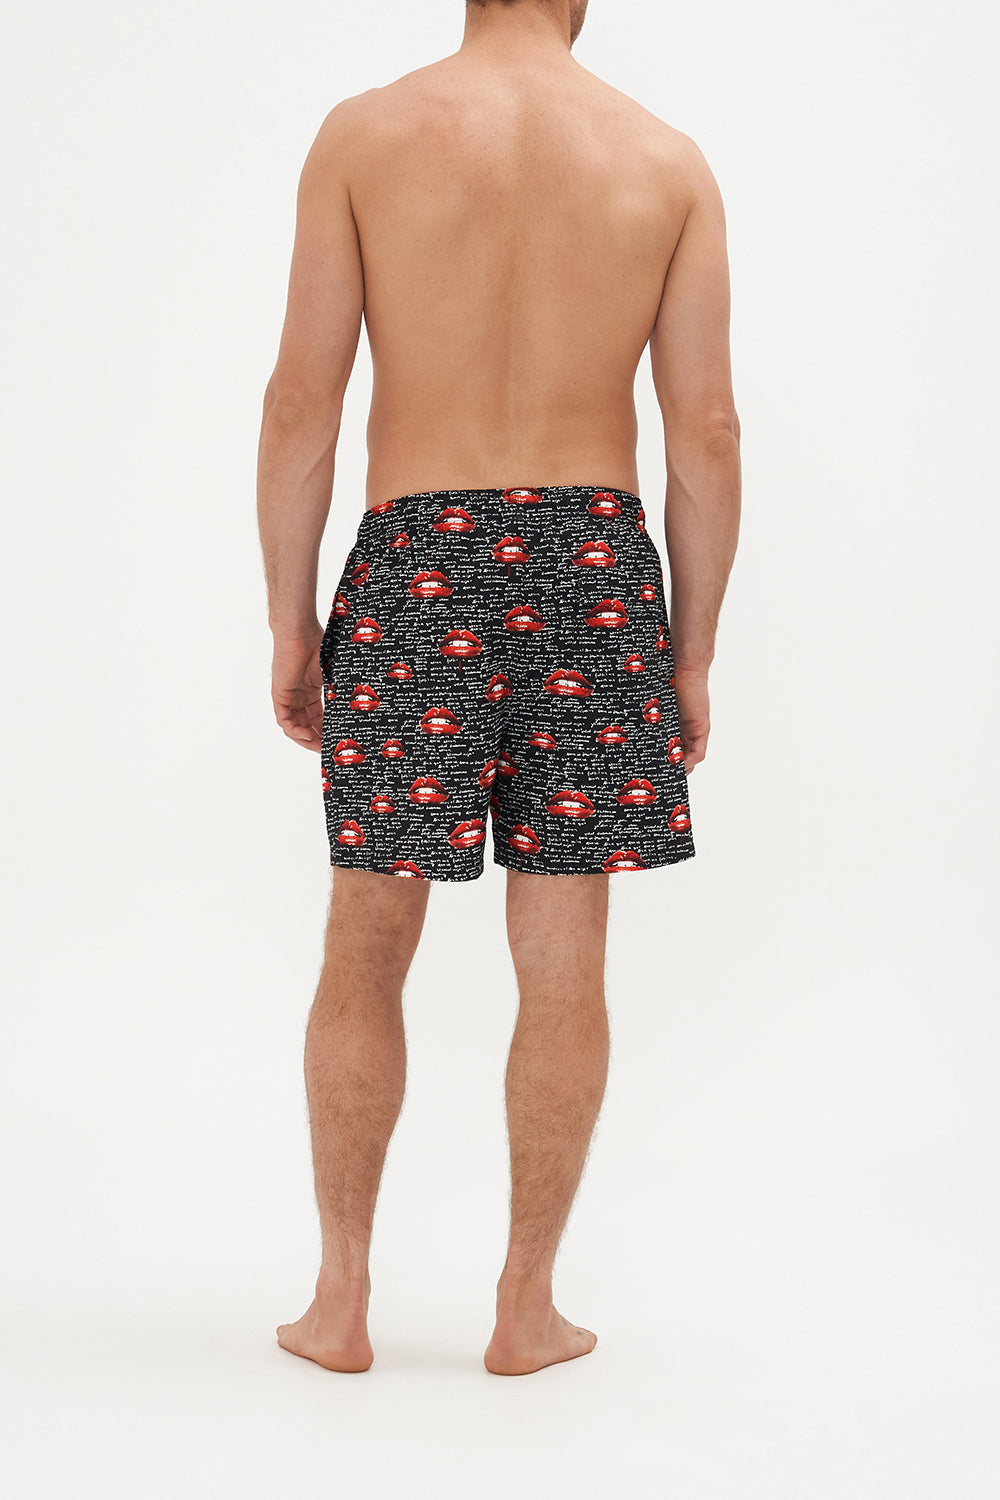 Back view of model wearing Hotel Franks by CAMILLA mens elastic waist boardshorts in black Chaos Magic Print 